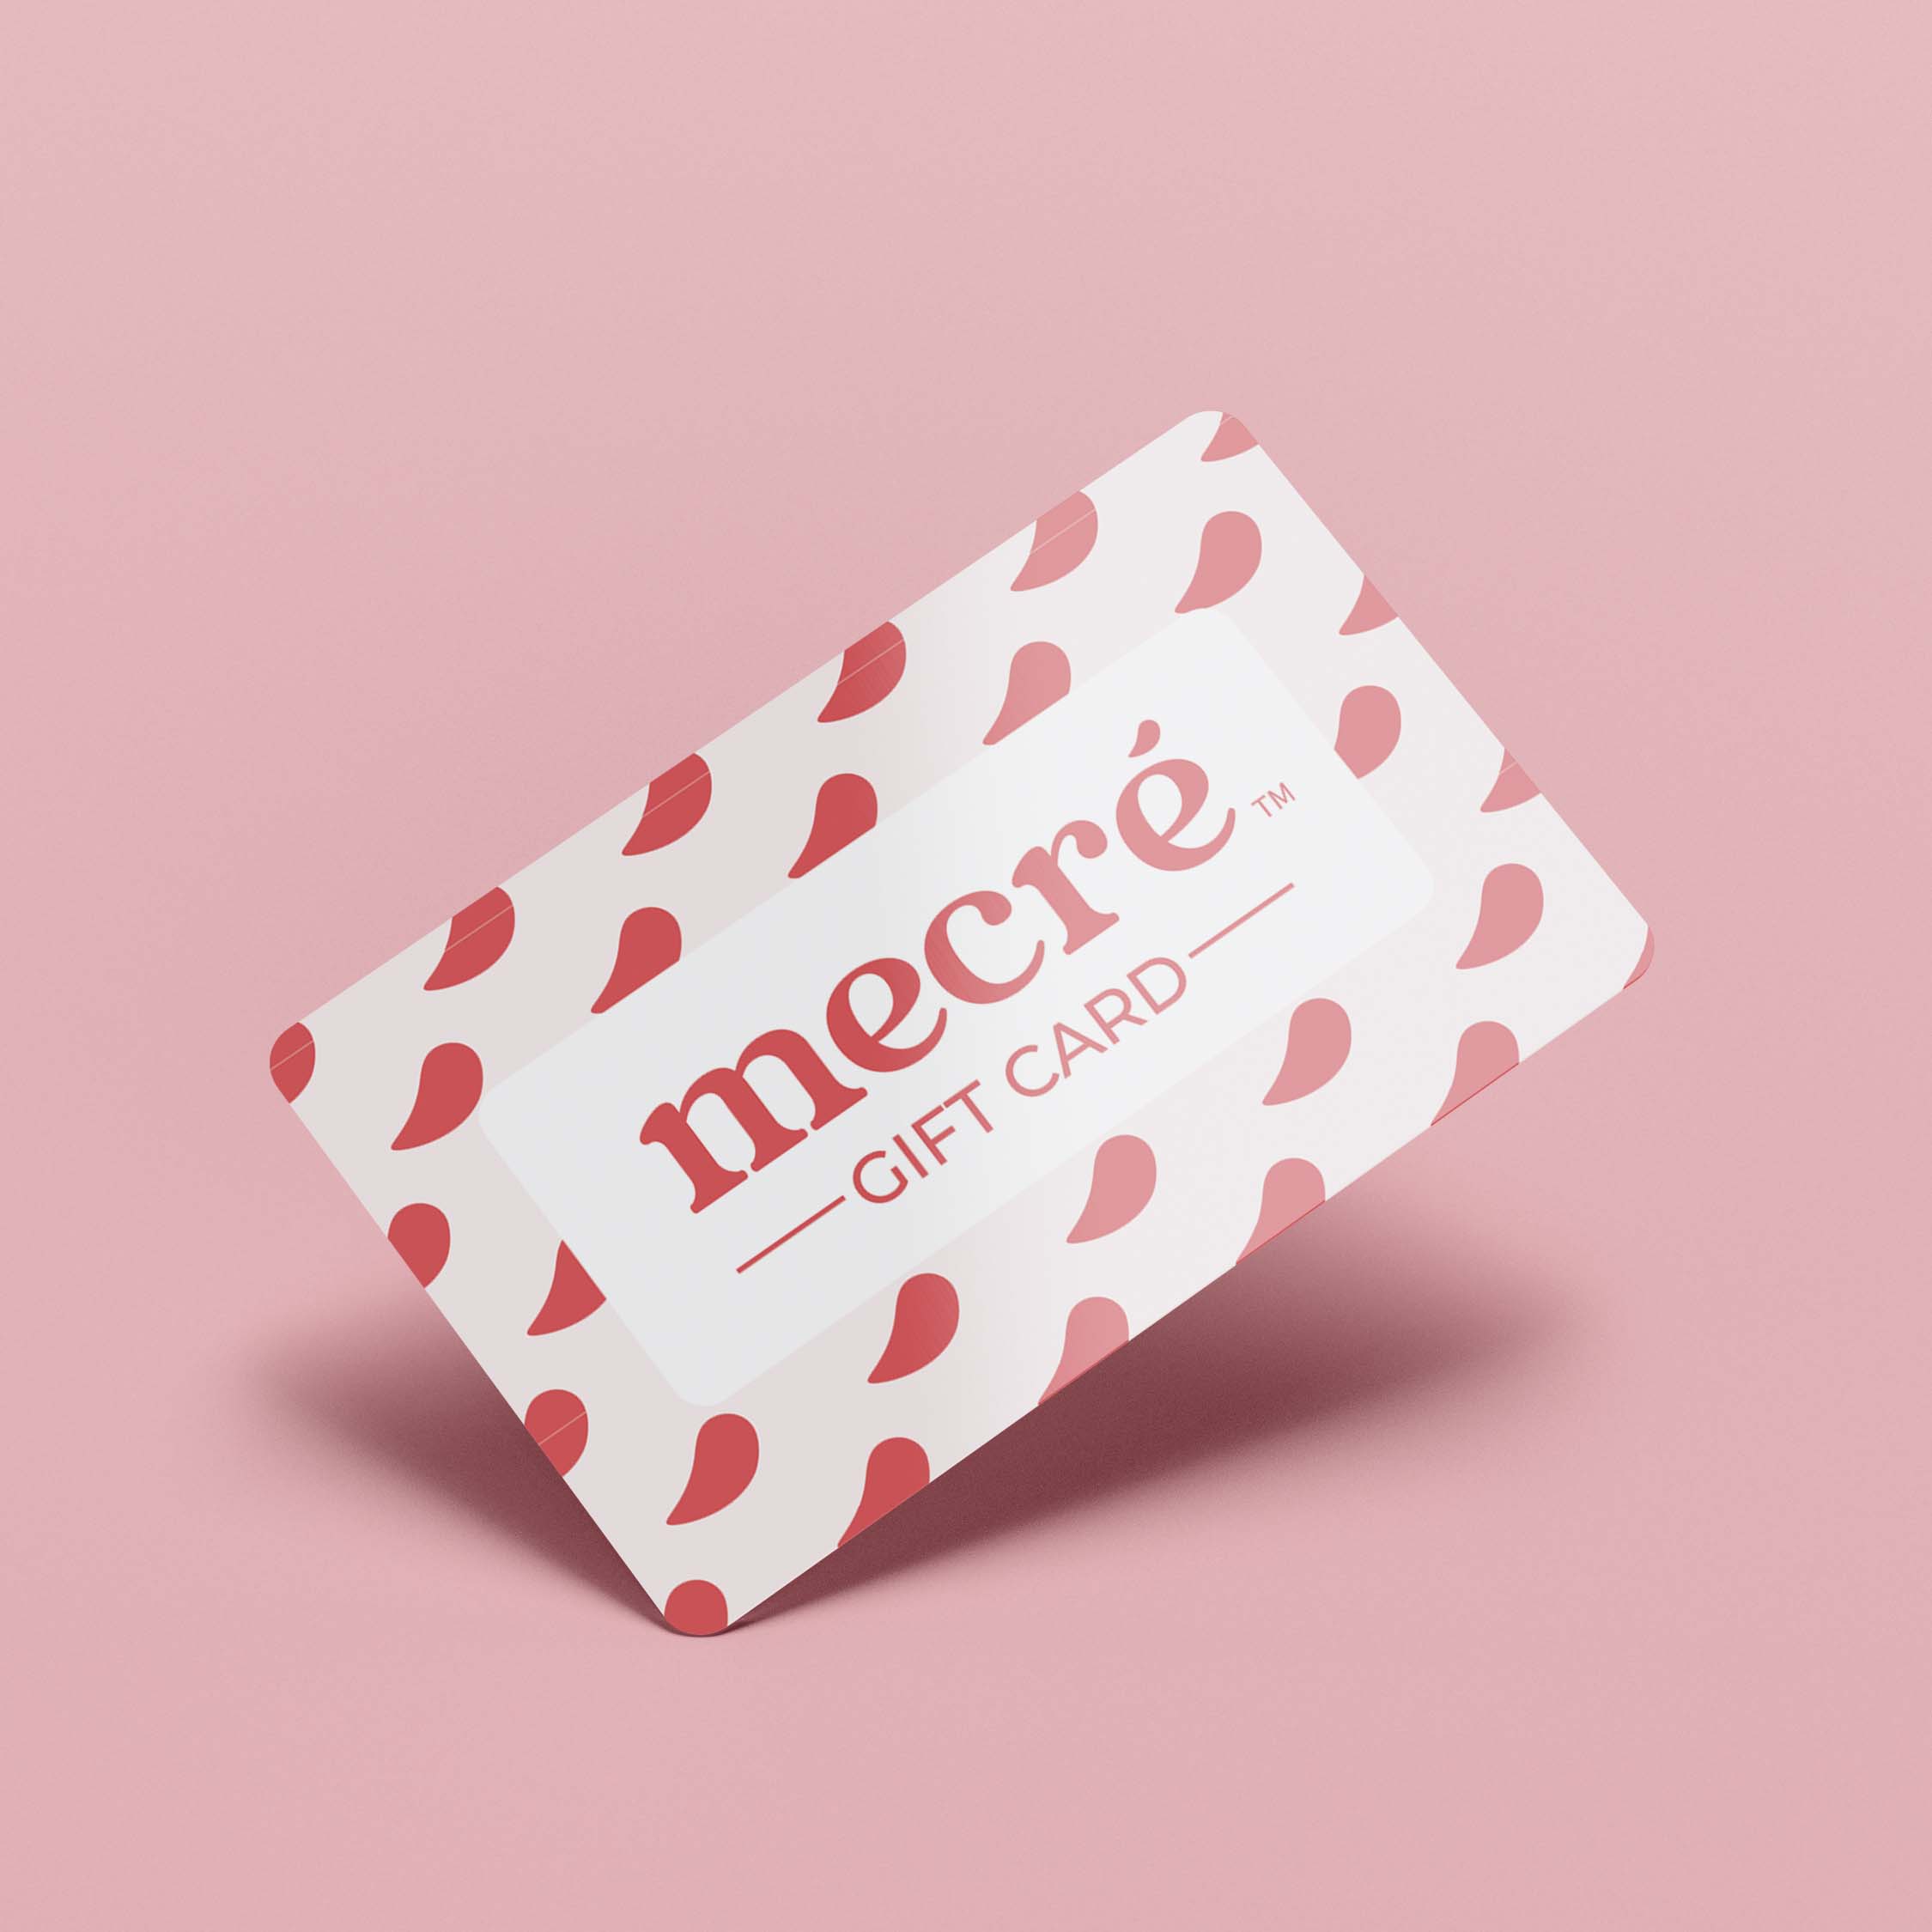 The next image is a Mecré gift card featuring the favicon pattern, which resembles an accent.